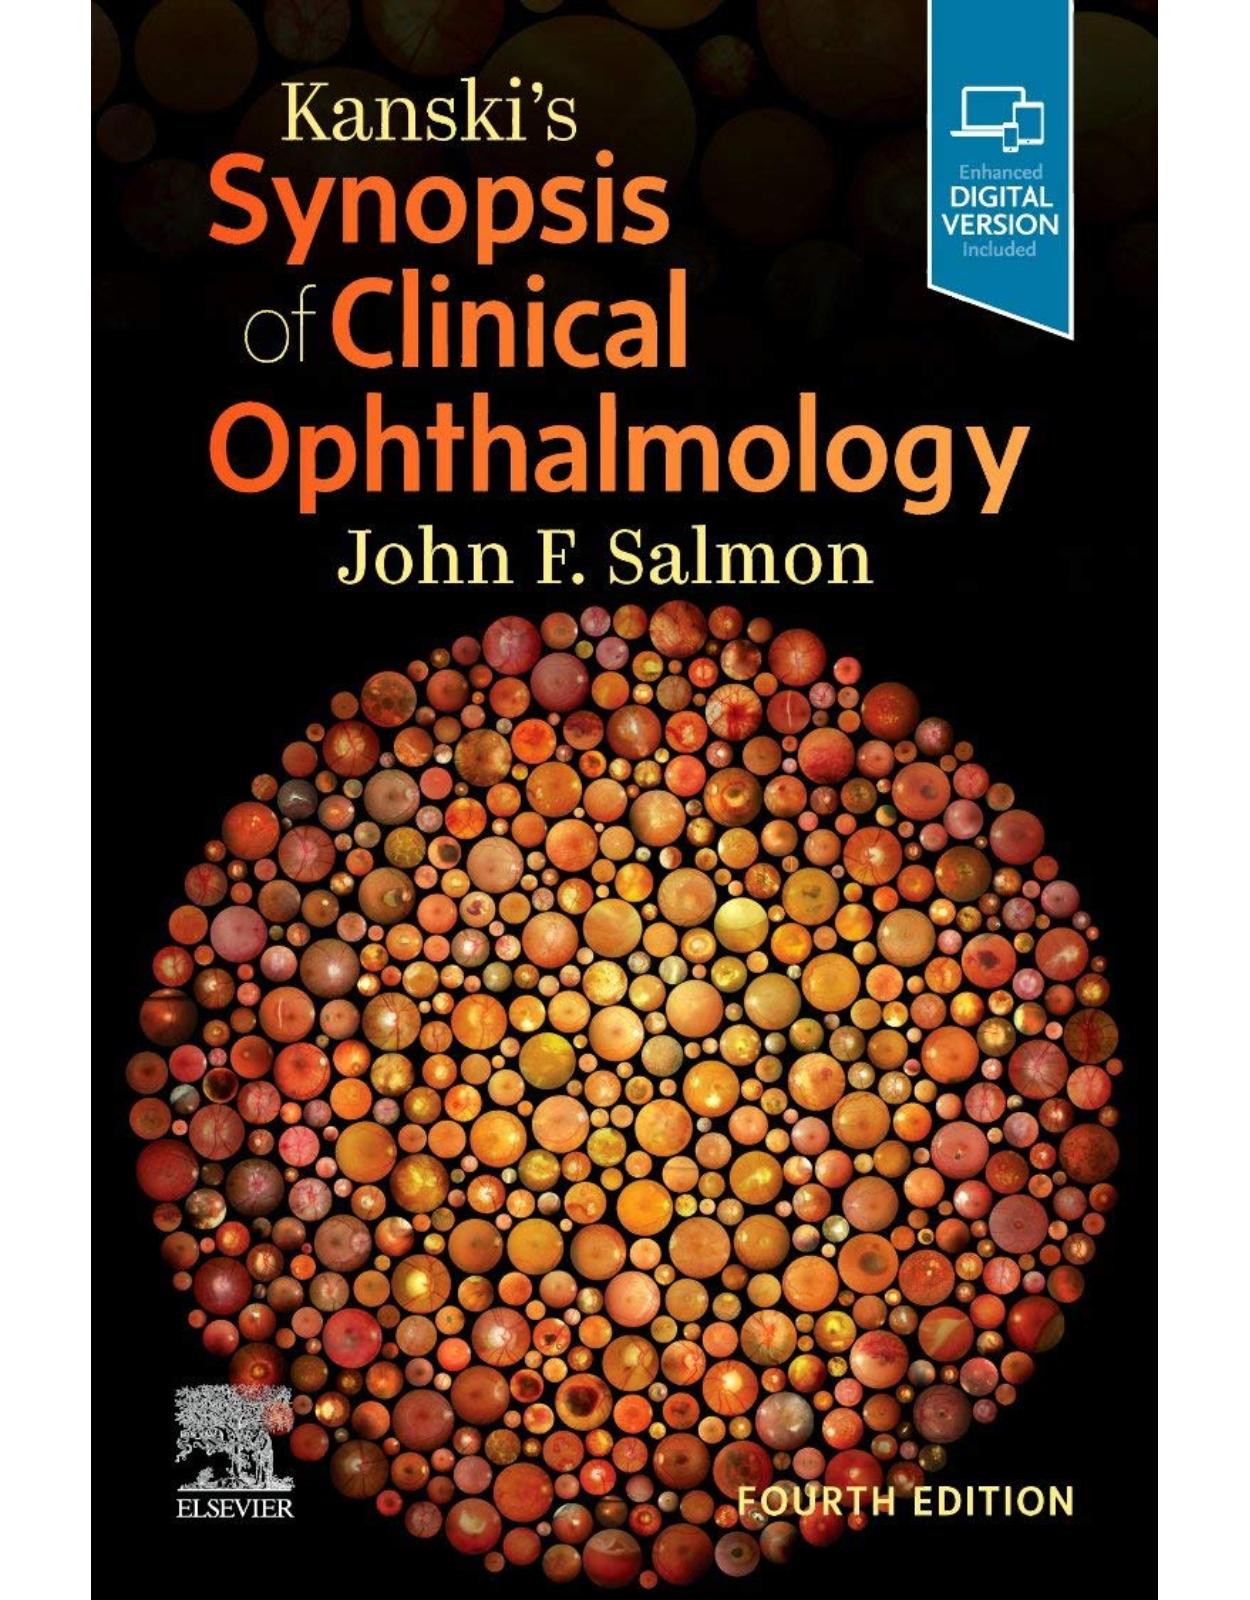 Kanski’s Synopsis of Clinical Ophthalmology 